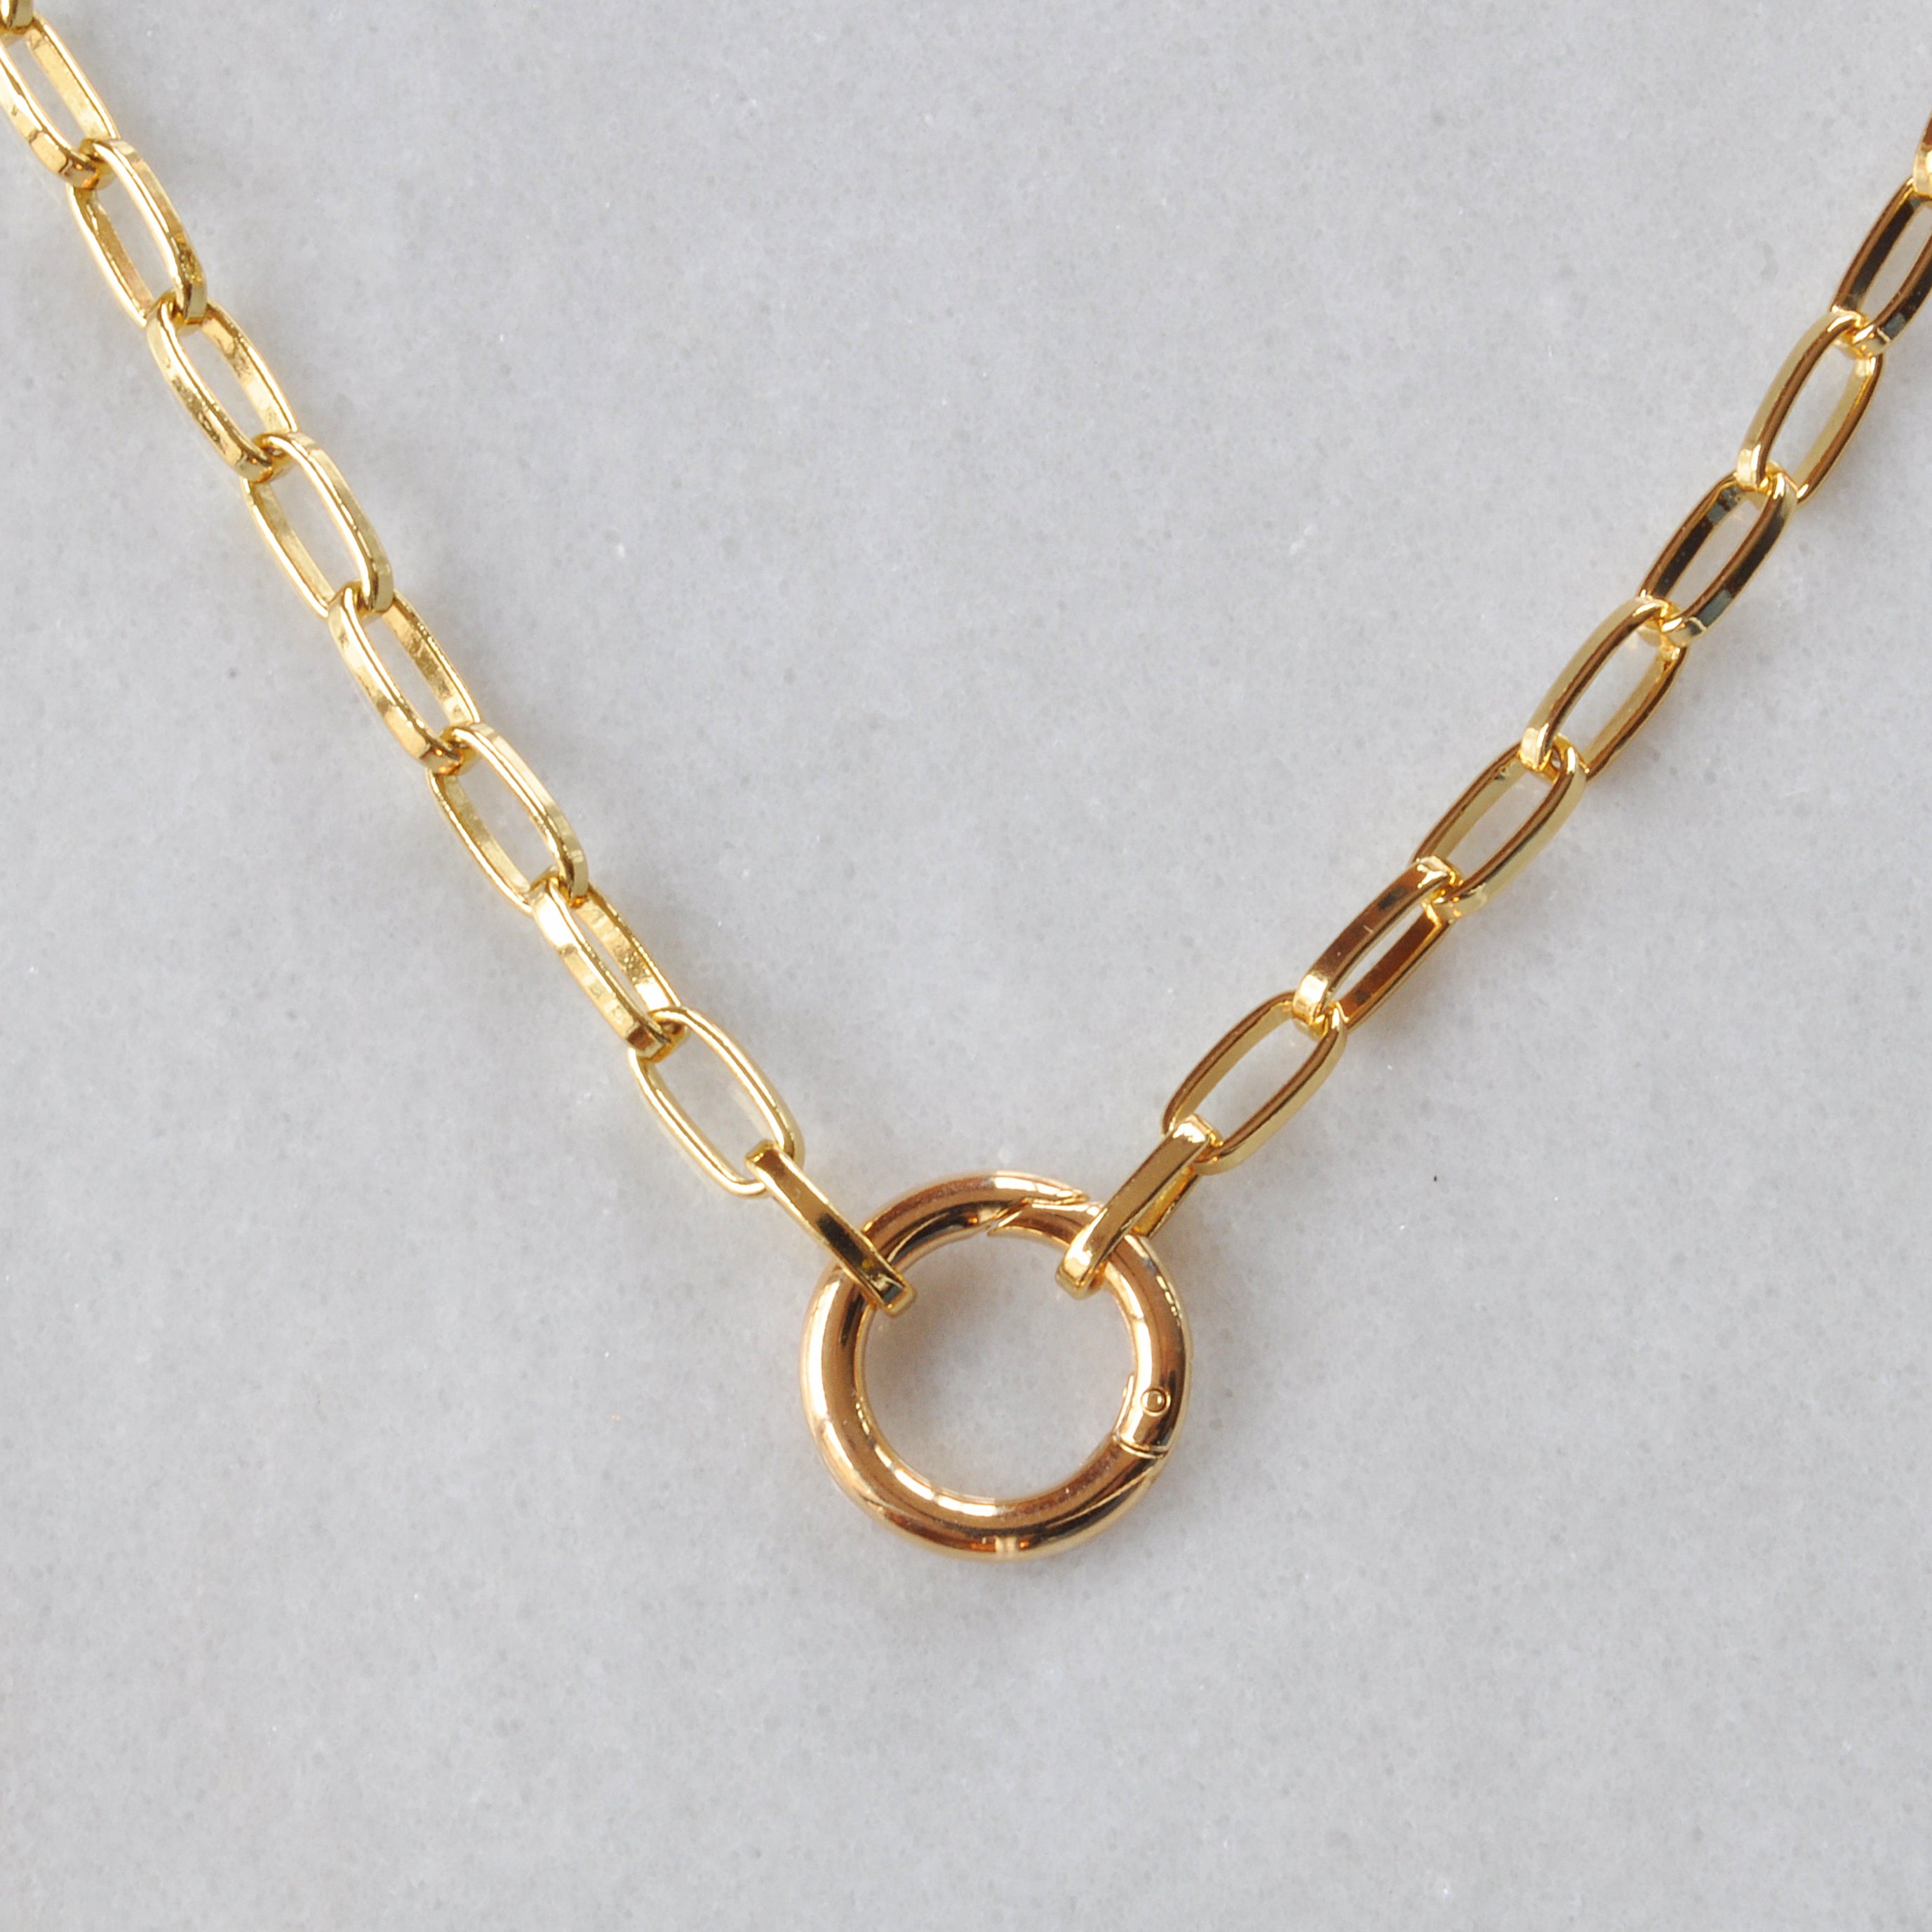 Carabiner Necklace - Linda Oval Clasp Necklace with Diamond in 18K Gold Vermeil